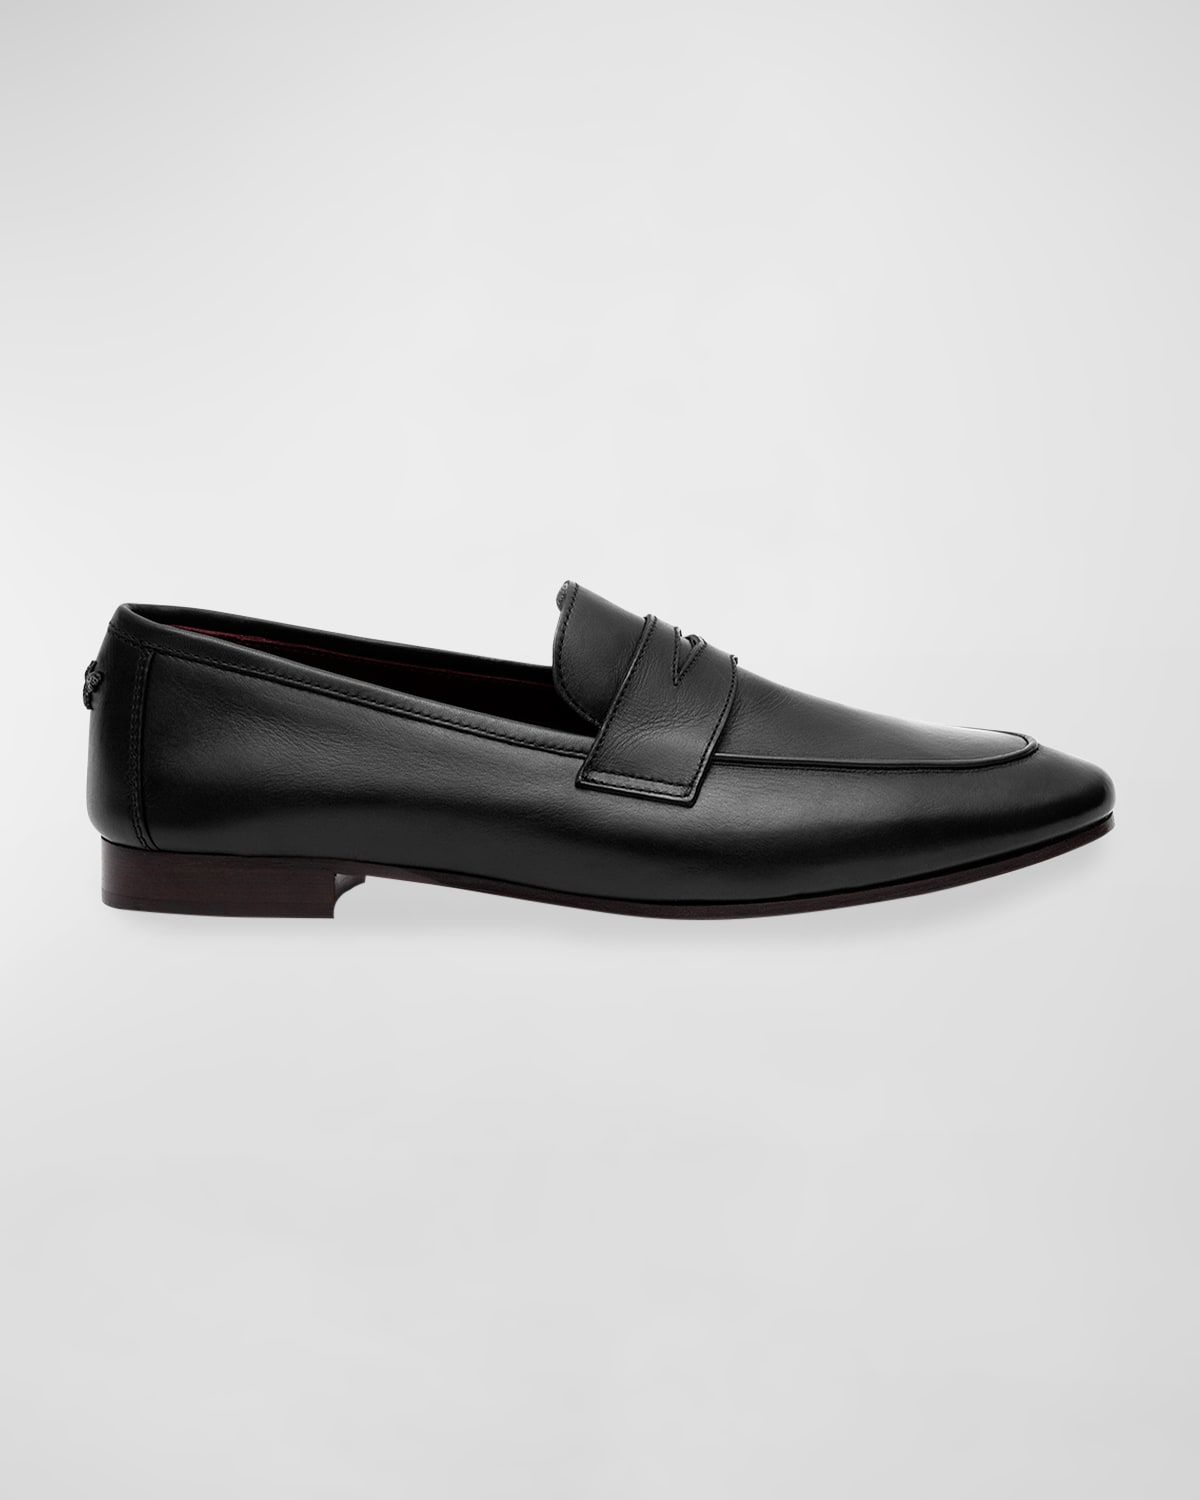 Flaneur Leather Flat Penny Loafers